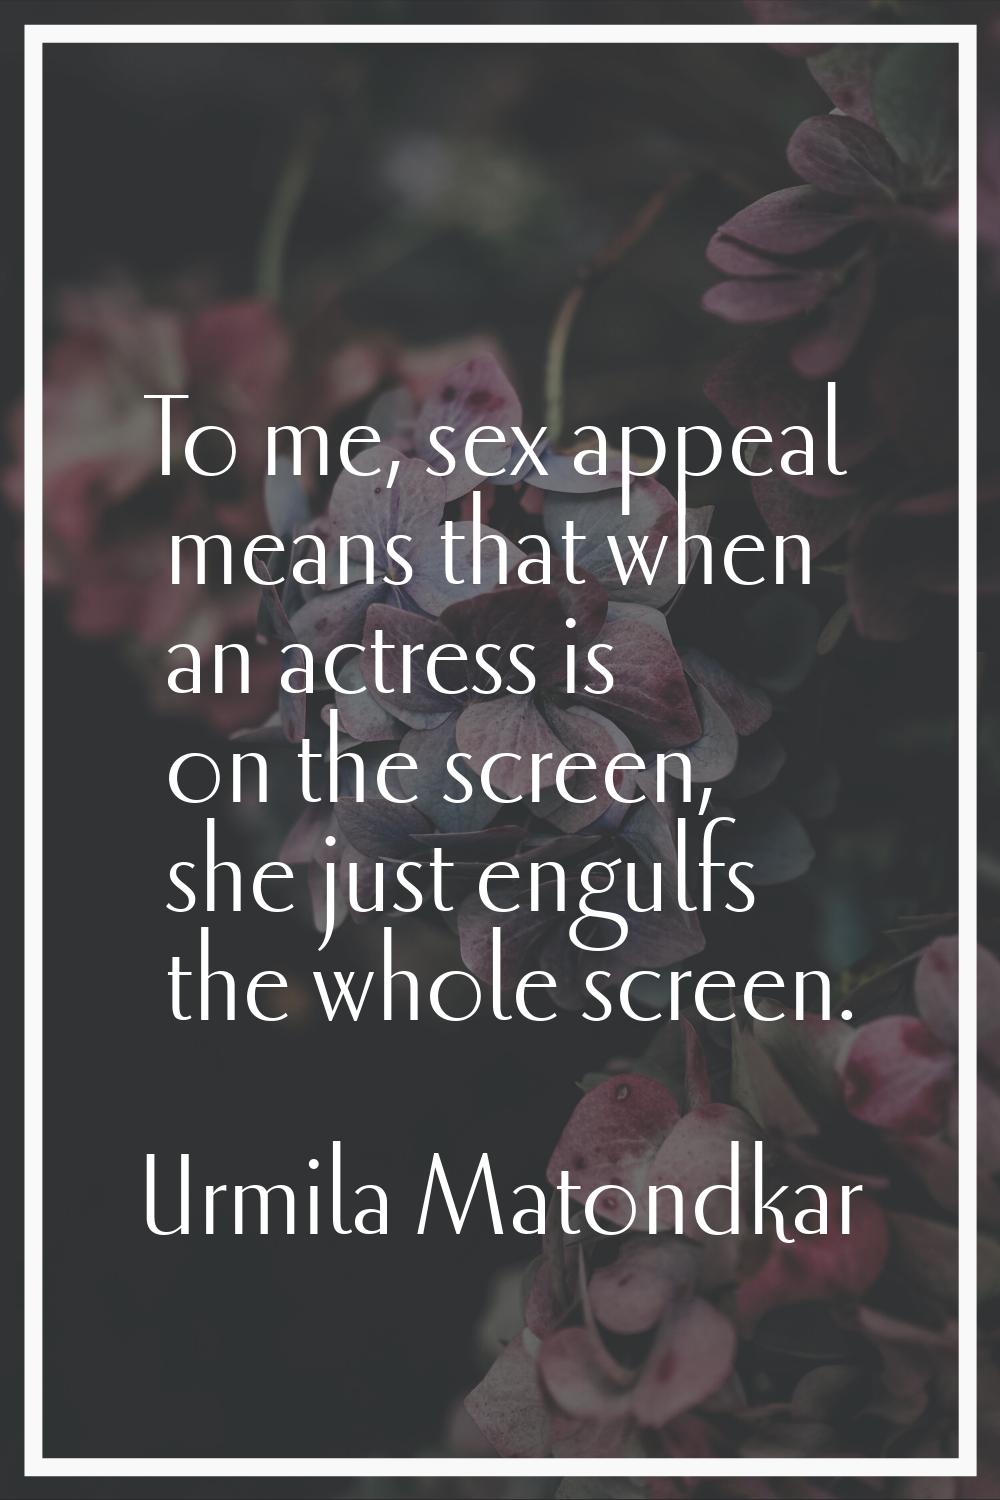 To me, sex appeal means that when an actress is on the screen, she just engulfs the whole screen.